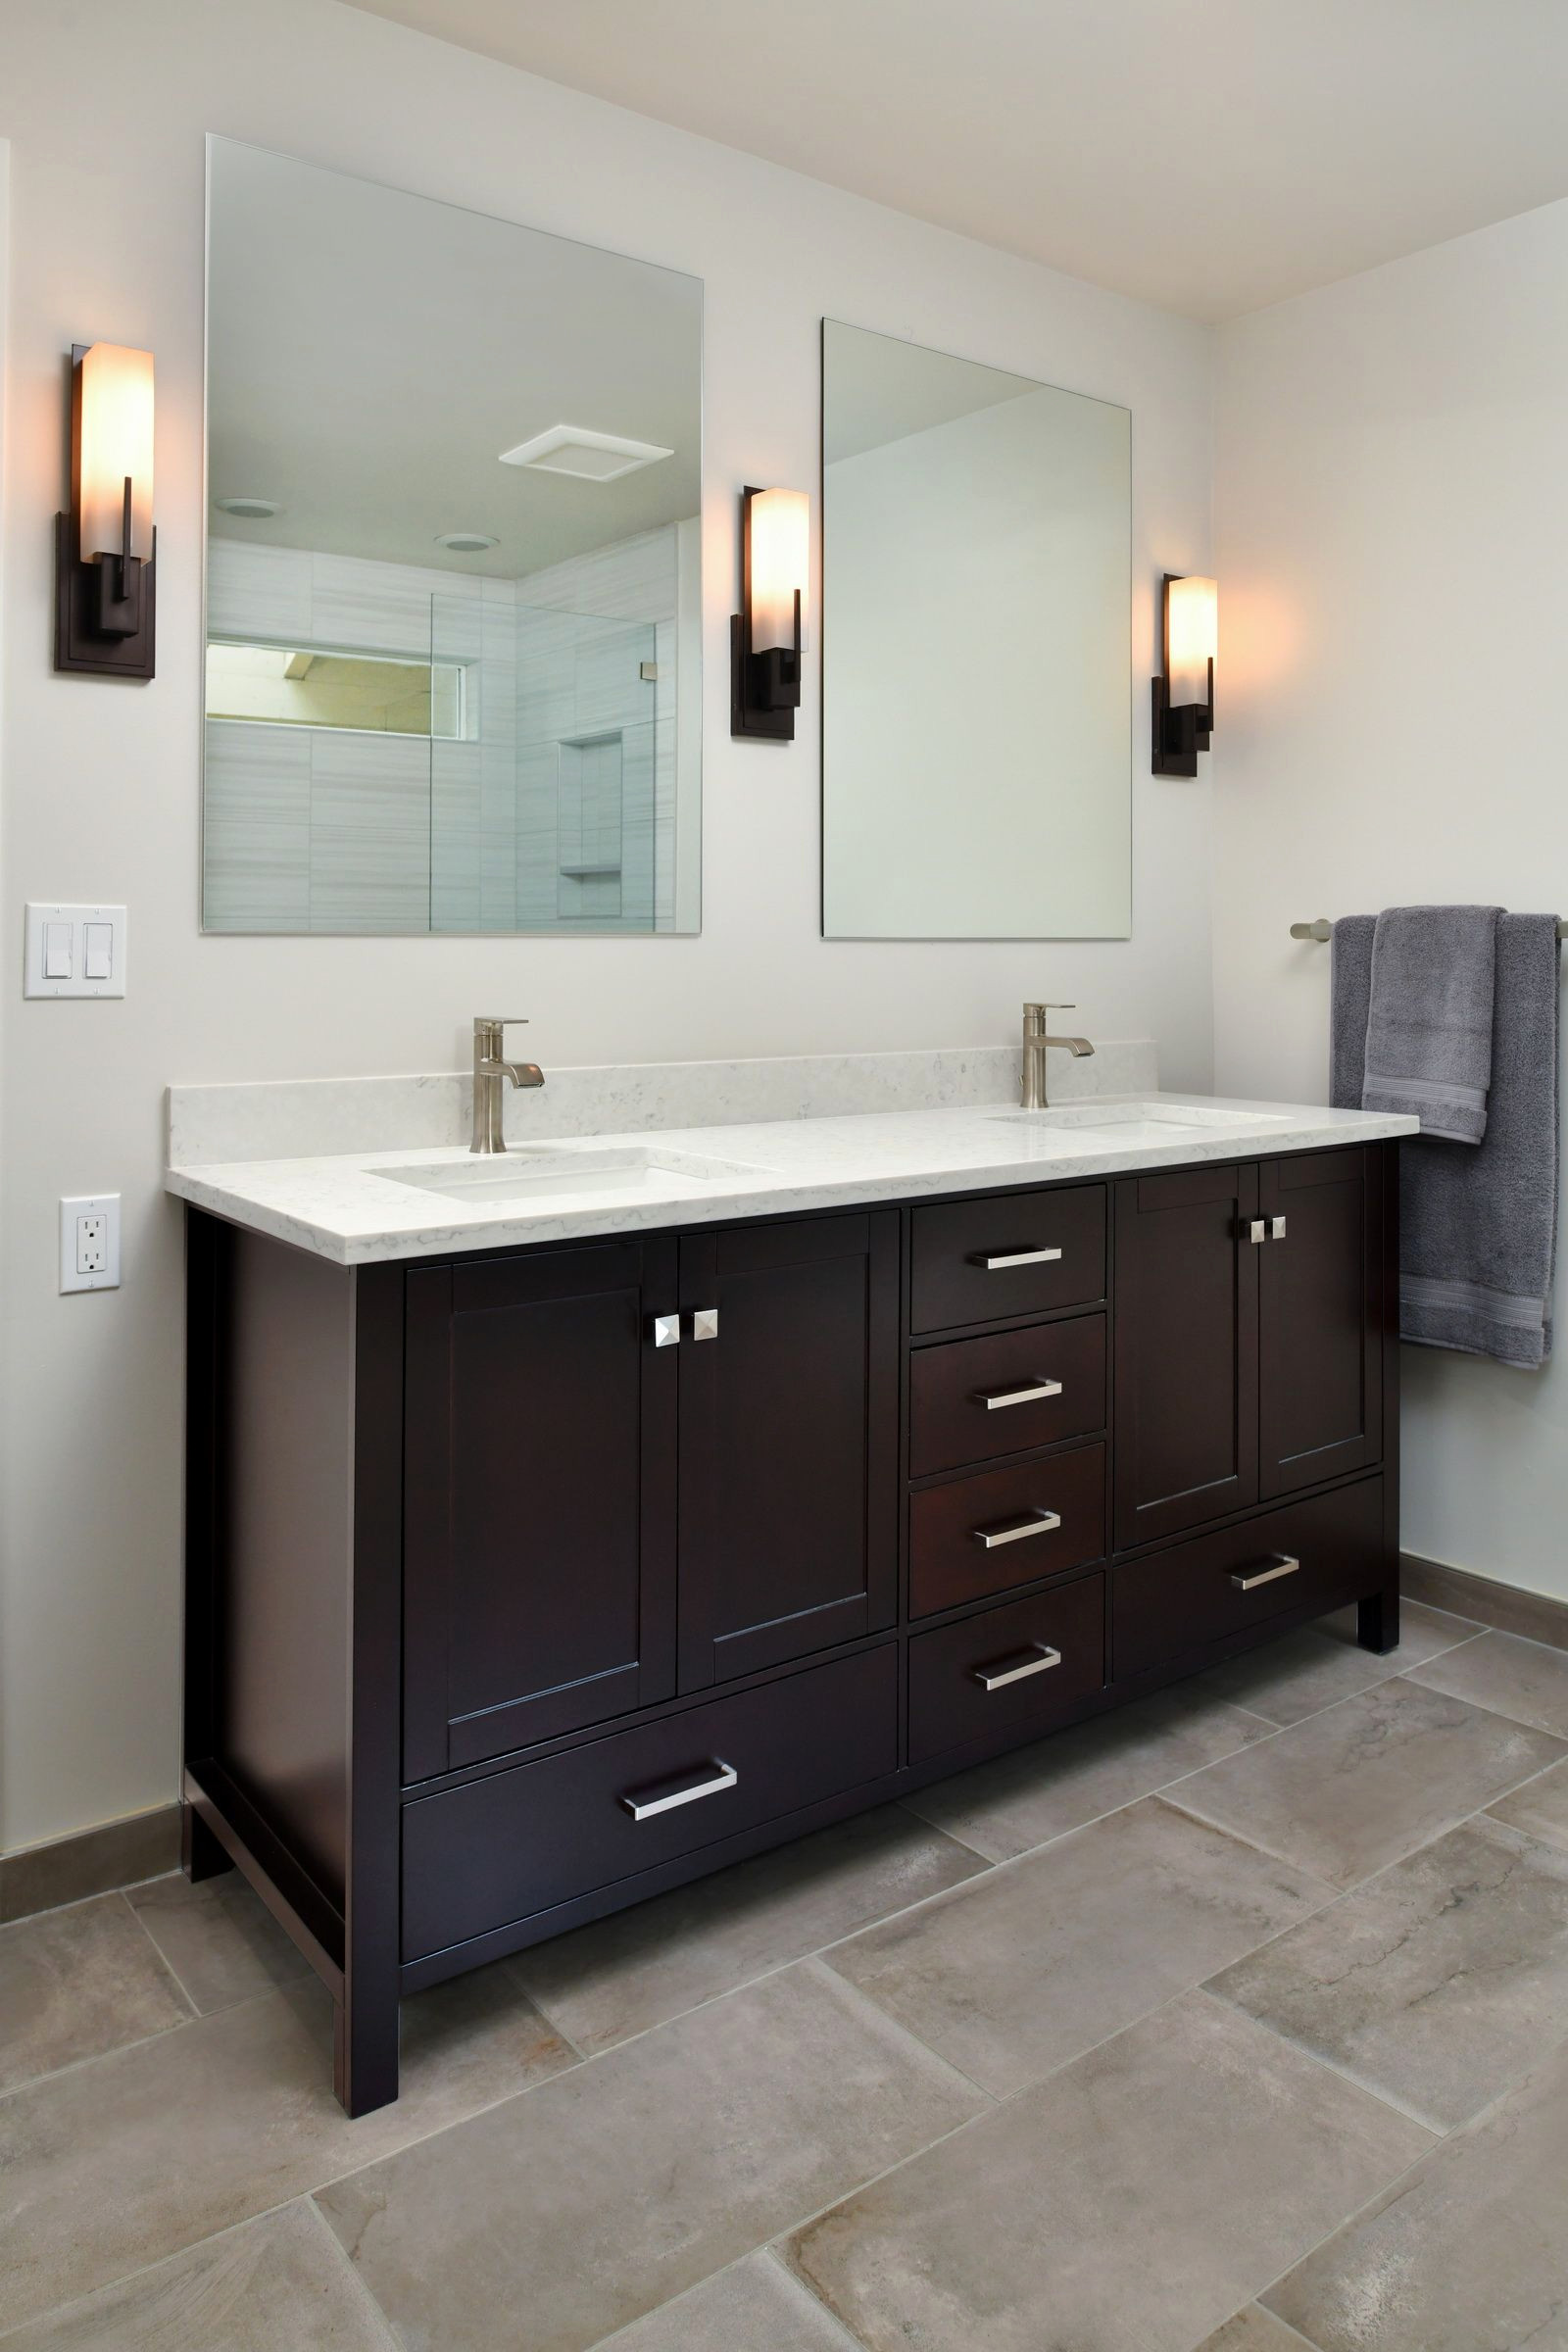 Master Bath - His & Hers